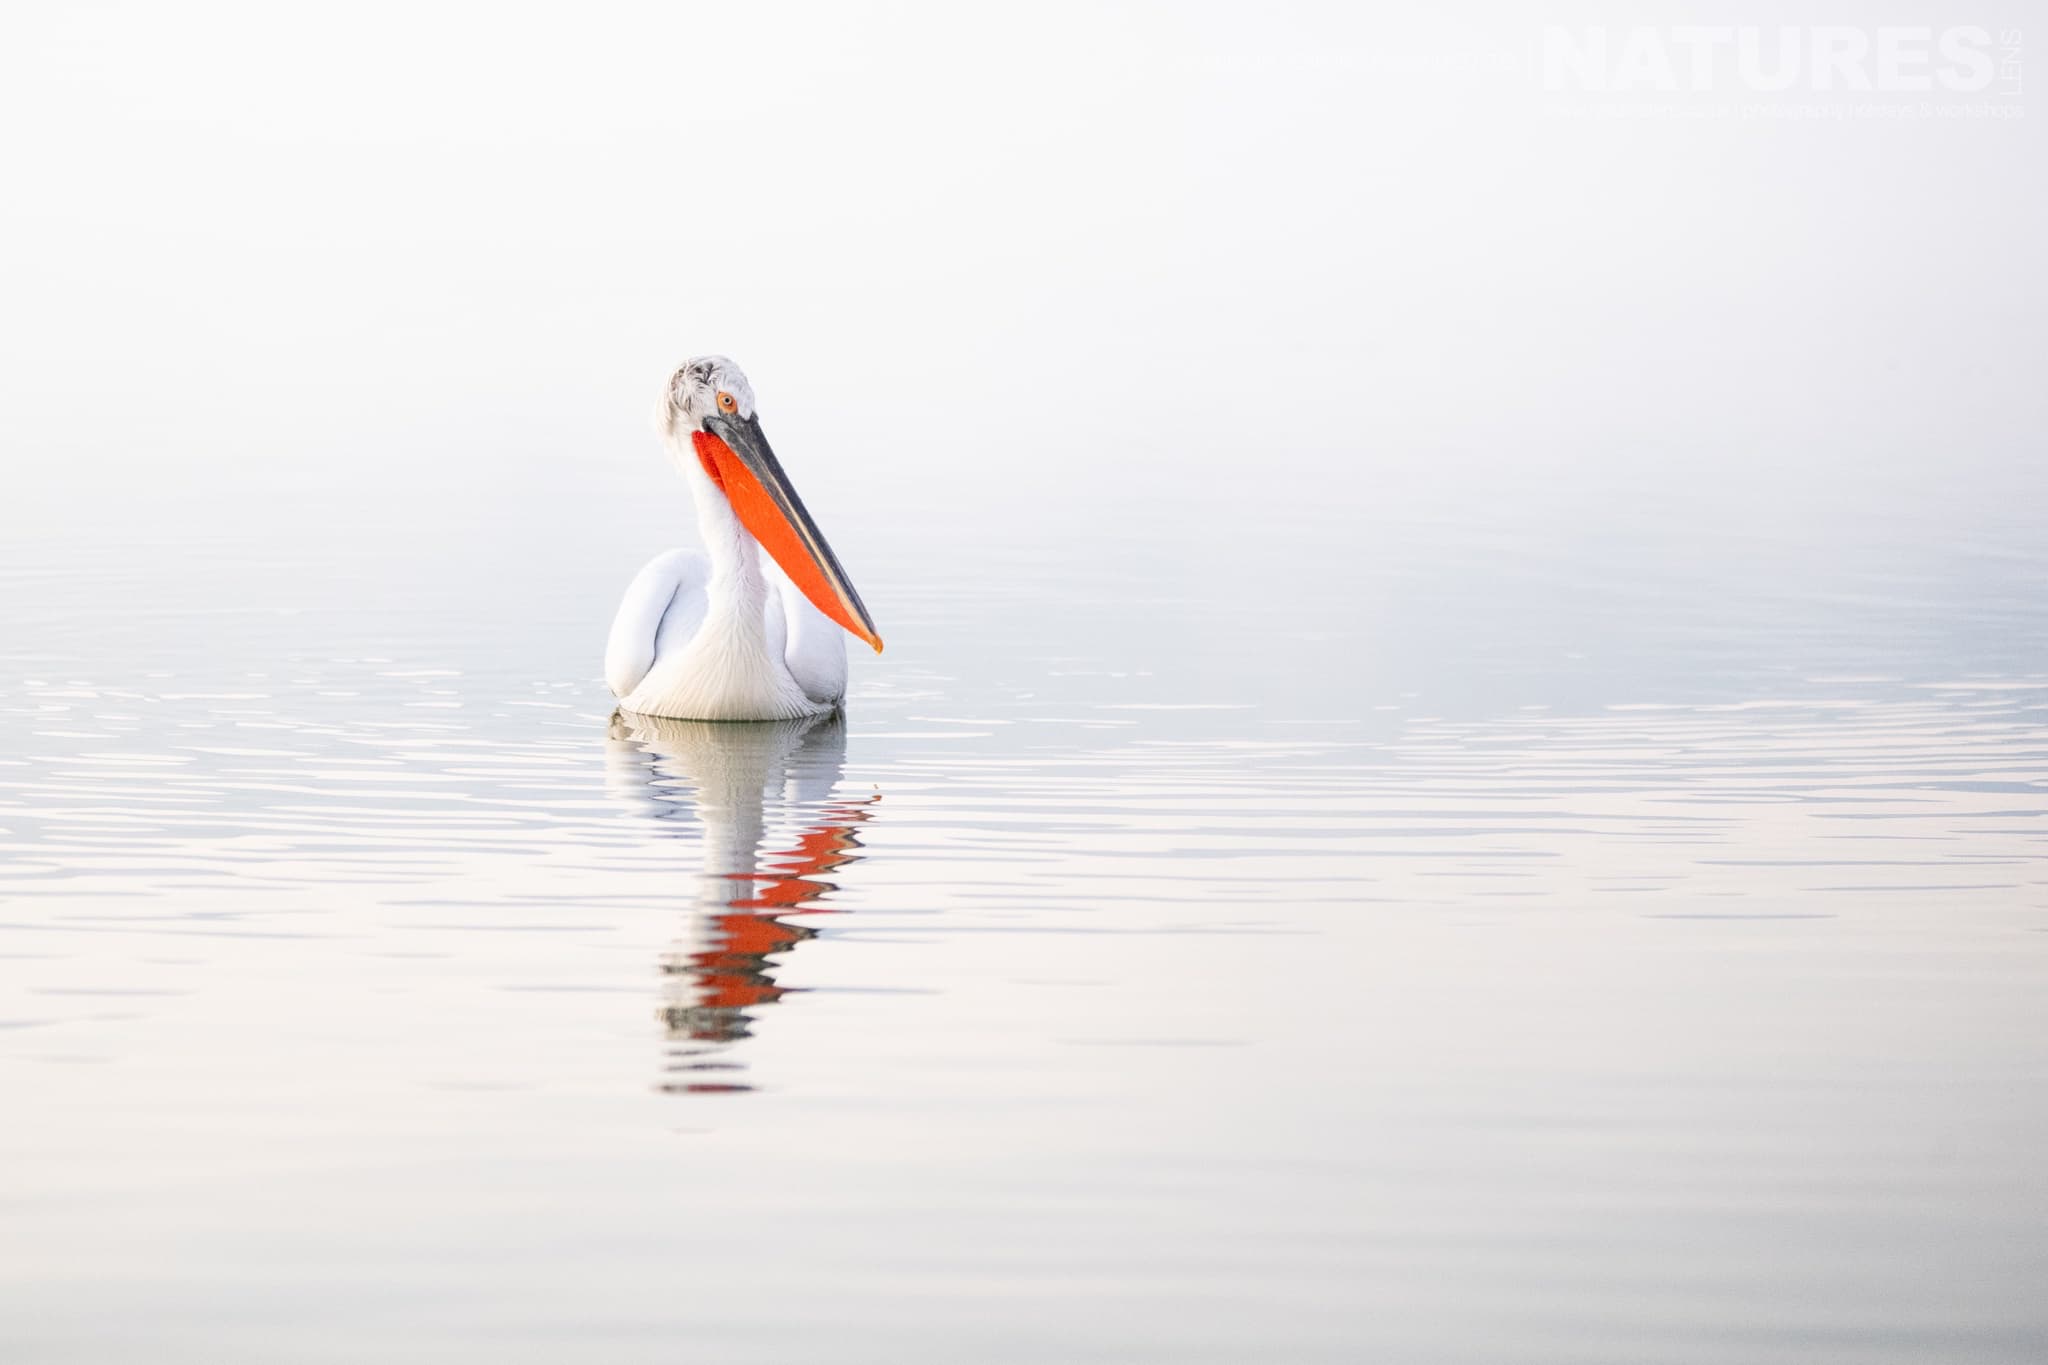 A Photograph From Alison Jenkins Which Demonstrates The Magic Of Dalmatian Pelican Photography 20